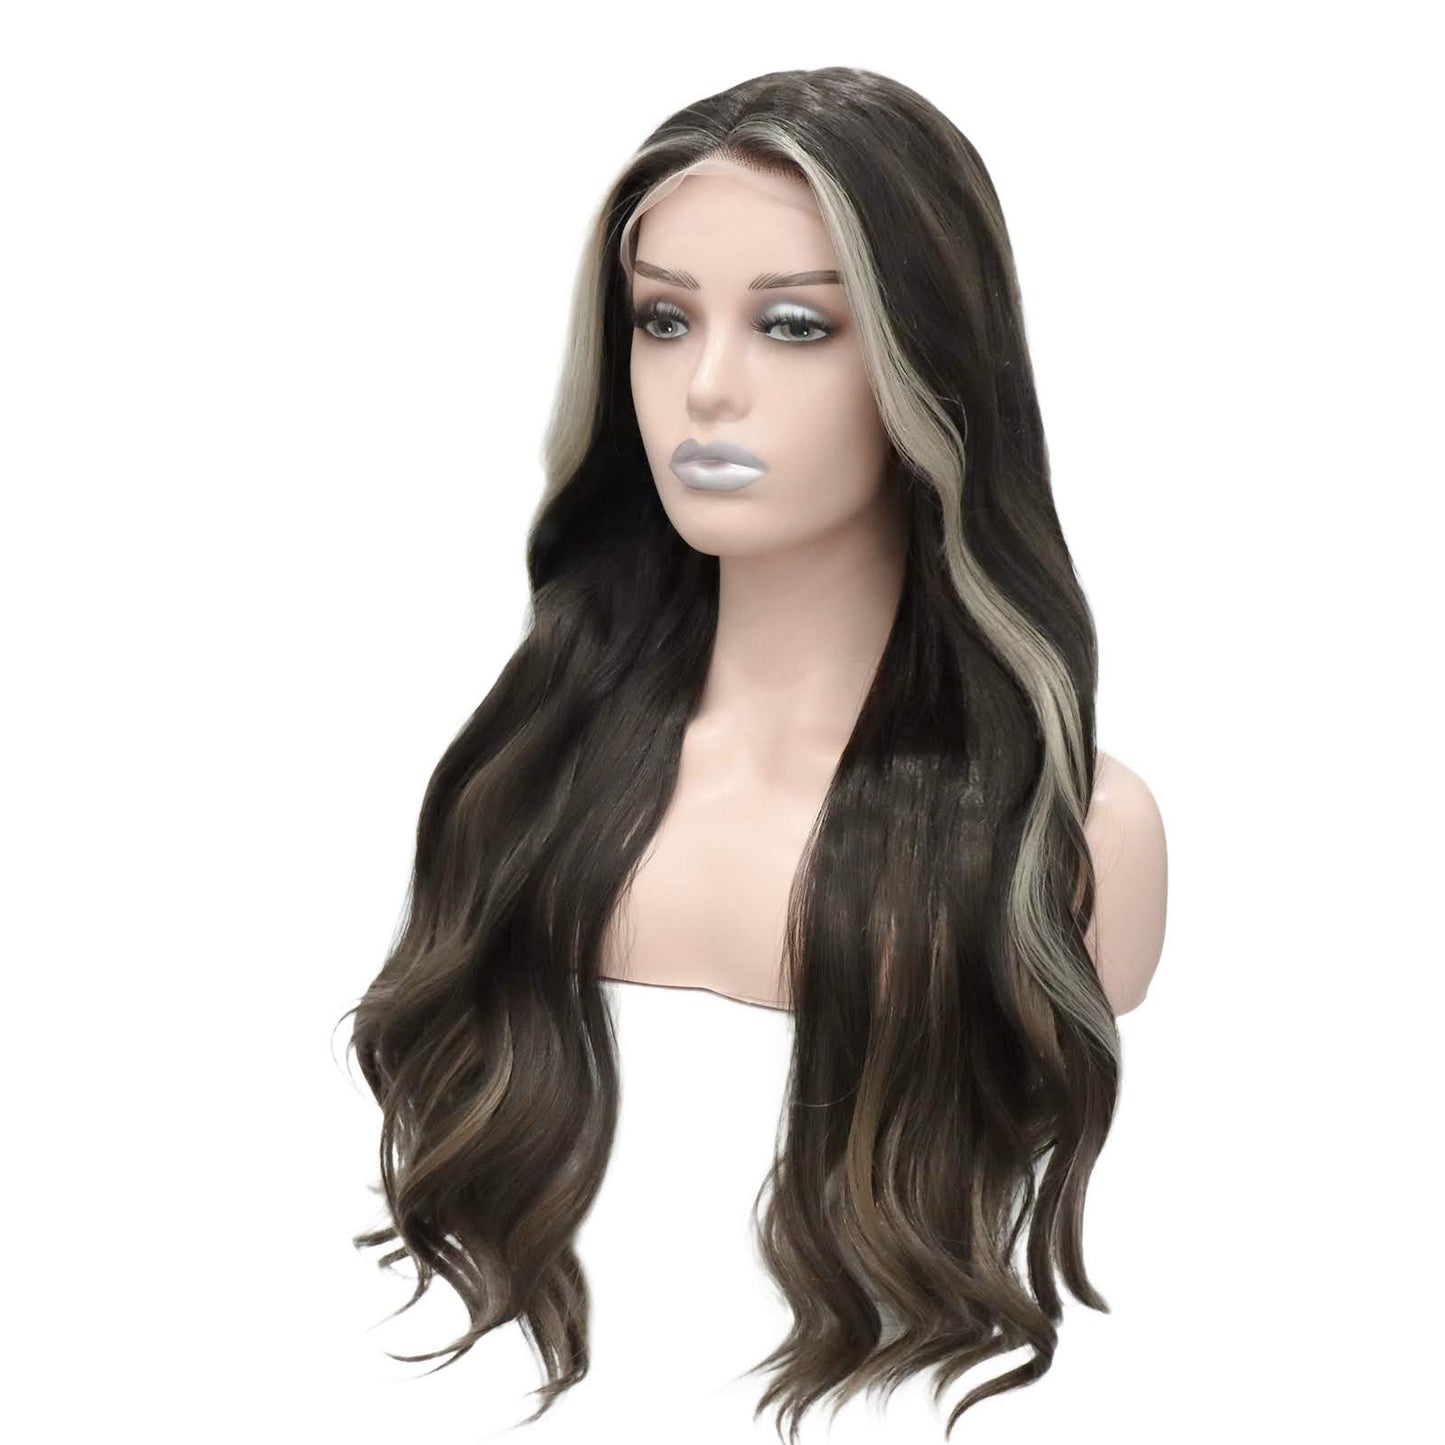 Streaked E-Girl Middle Part Bangs Lace Front Wig. Amal